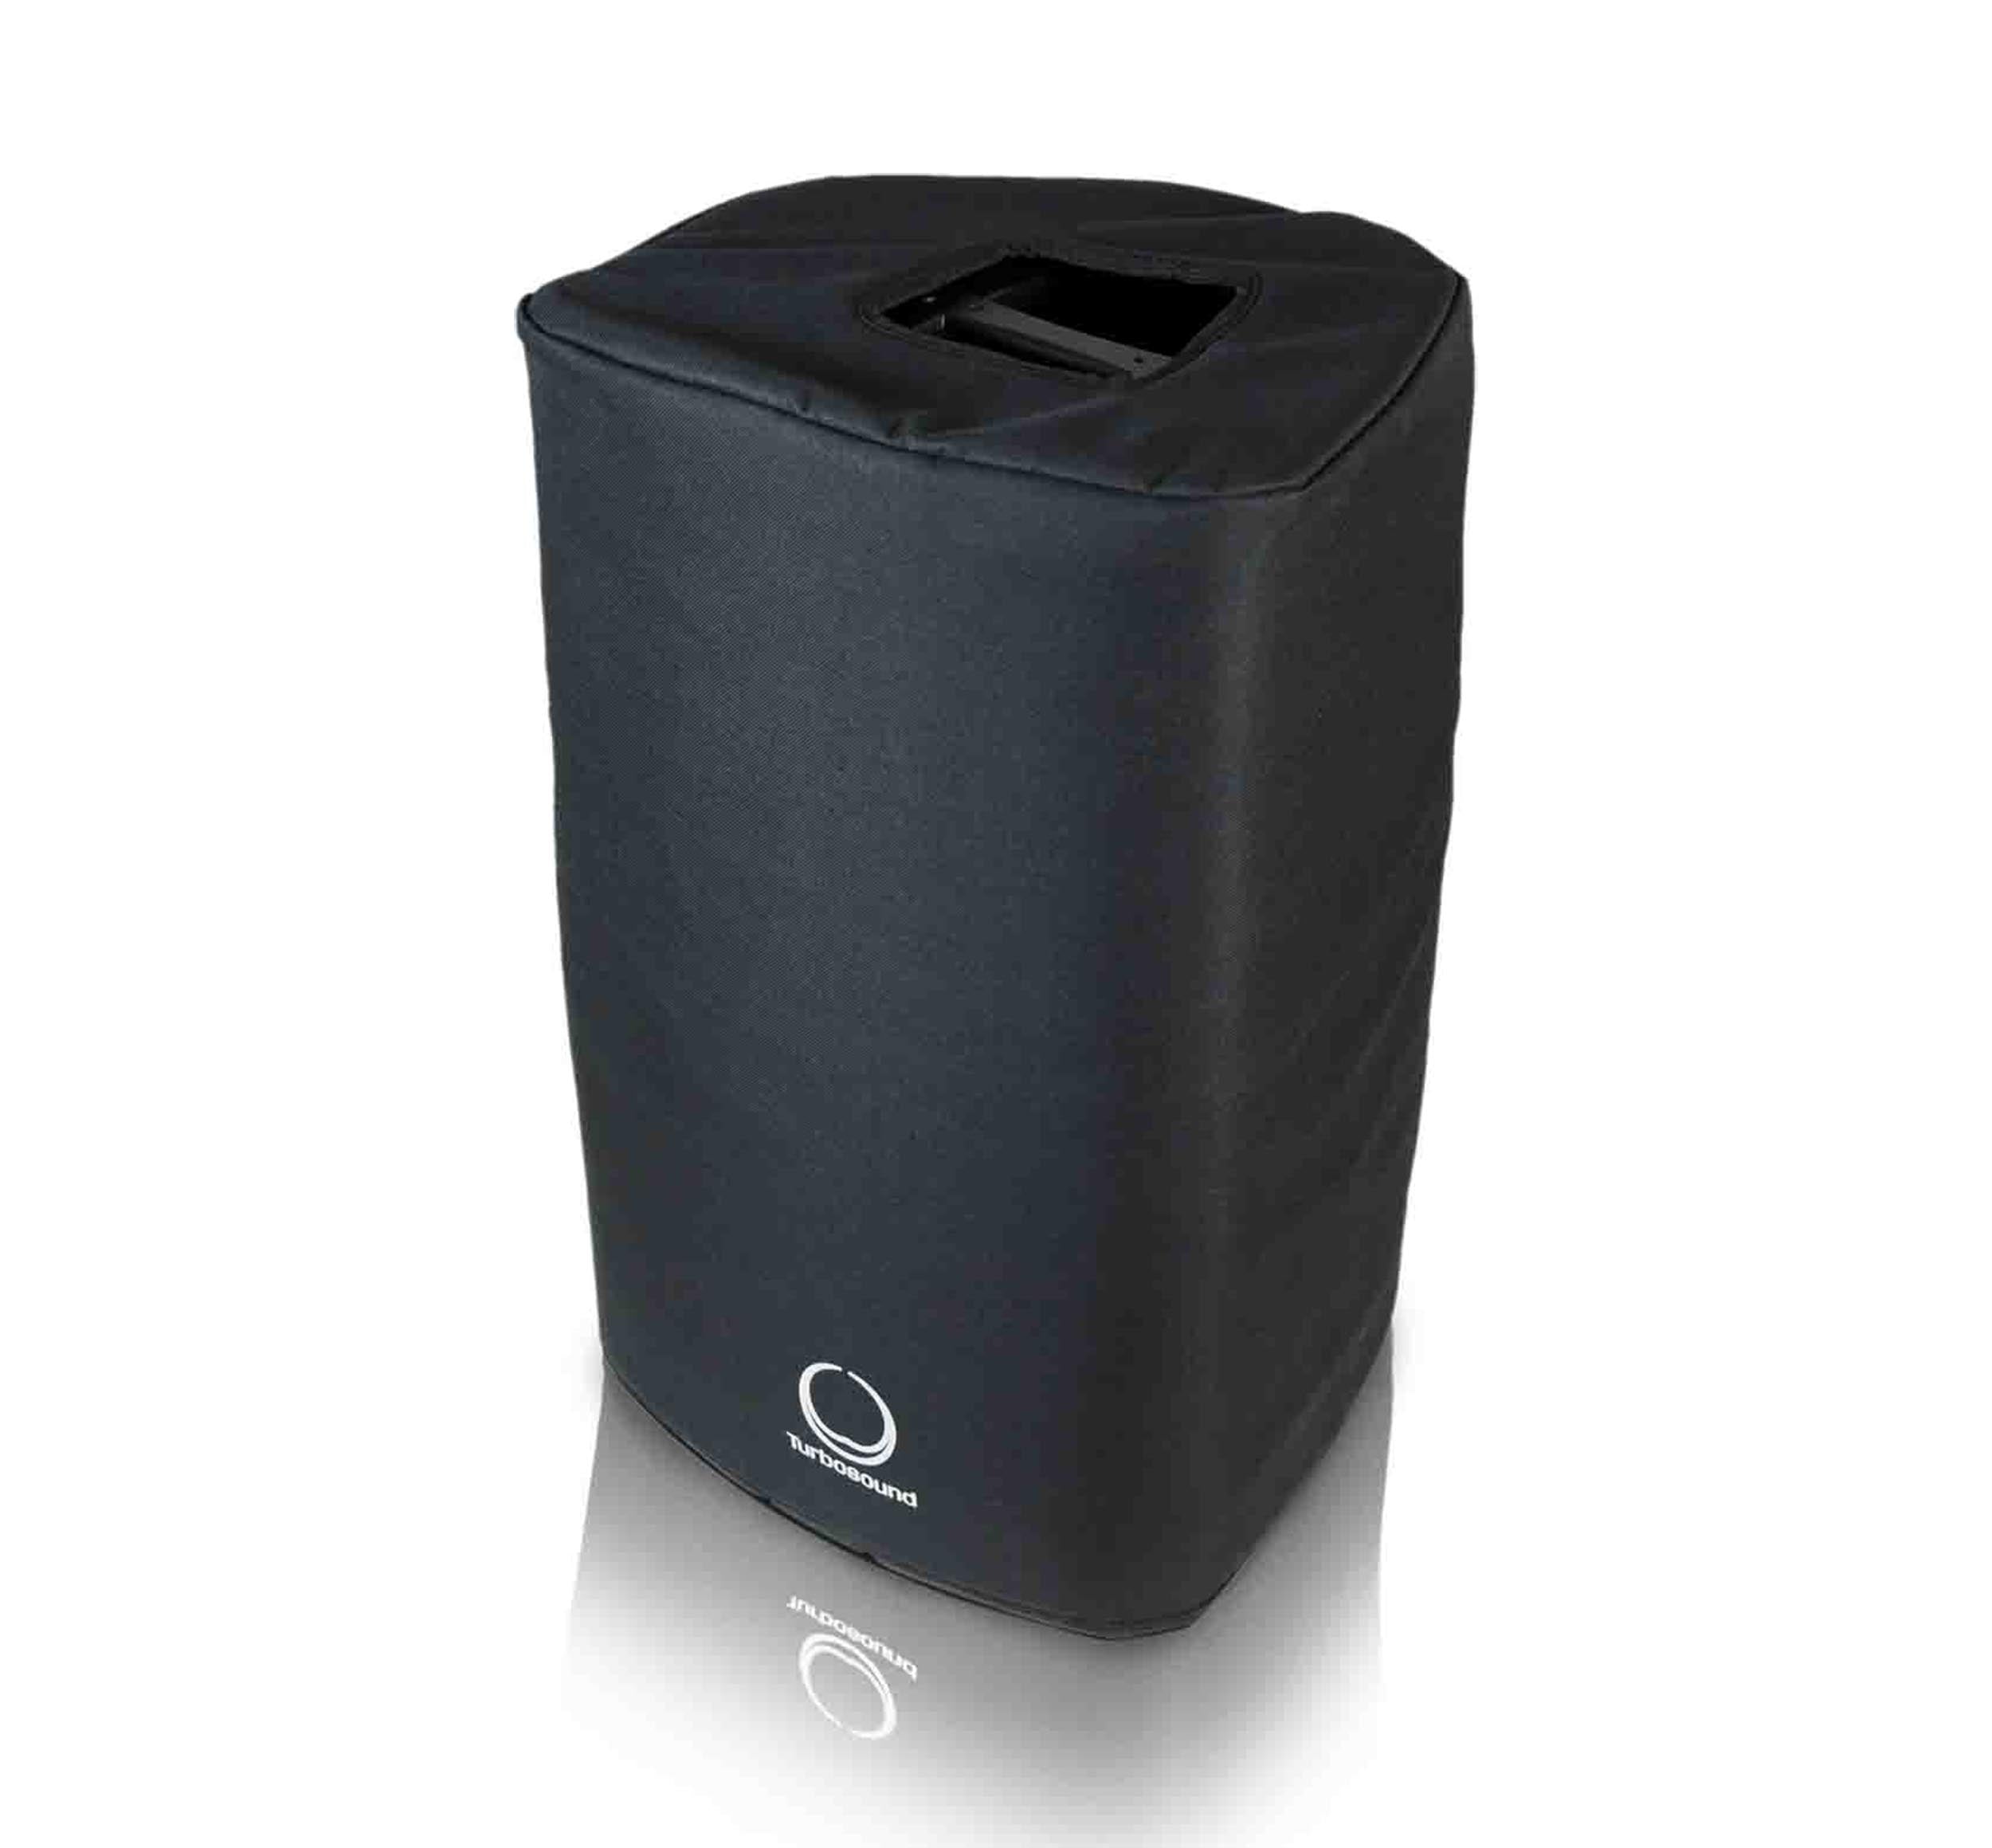 Turbosound TS-PC12-1, Deluxe Water Resistant Protective Cover for 12" Loudspeakers by Turbosound